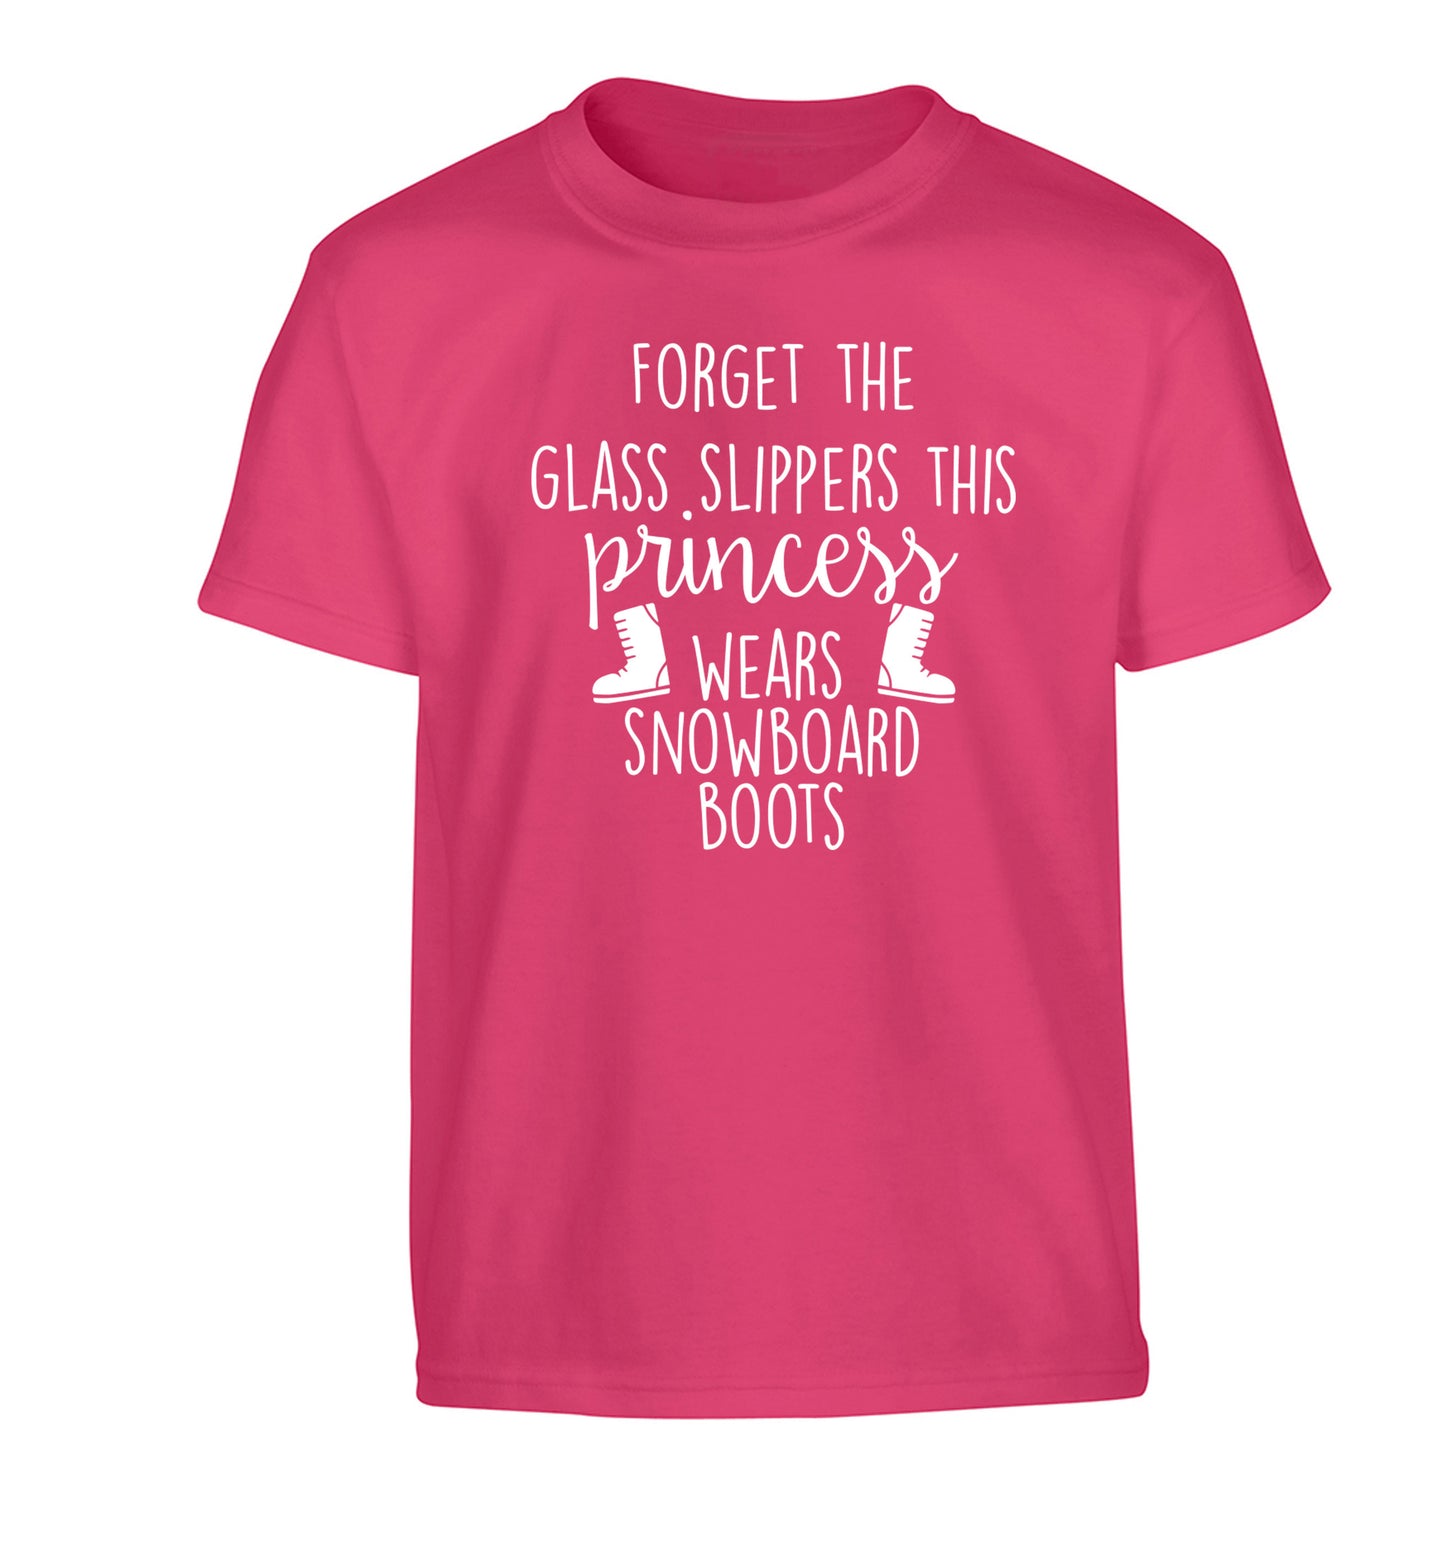 Forget the glass slippers this princess wears snowboard boots Children's pink Tshirt 12-14 Years